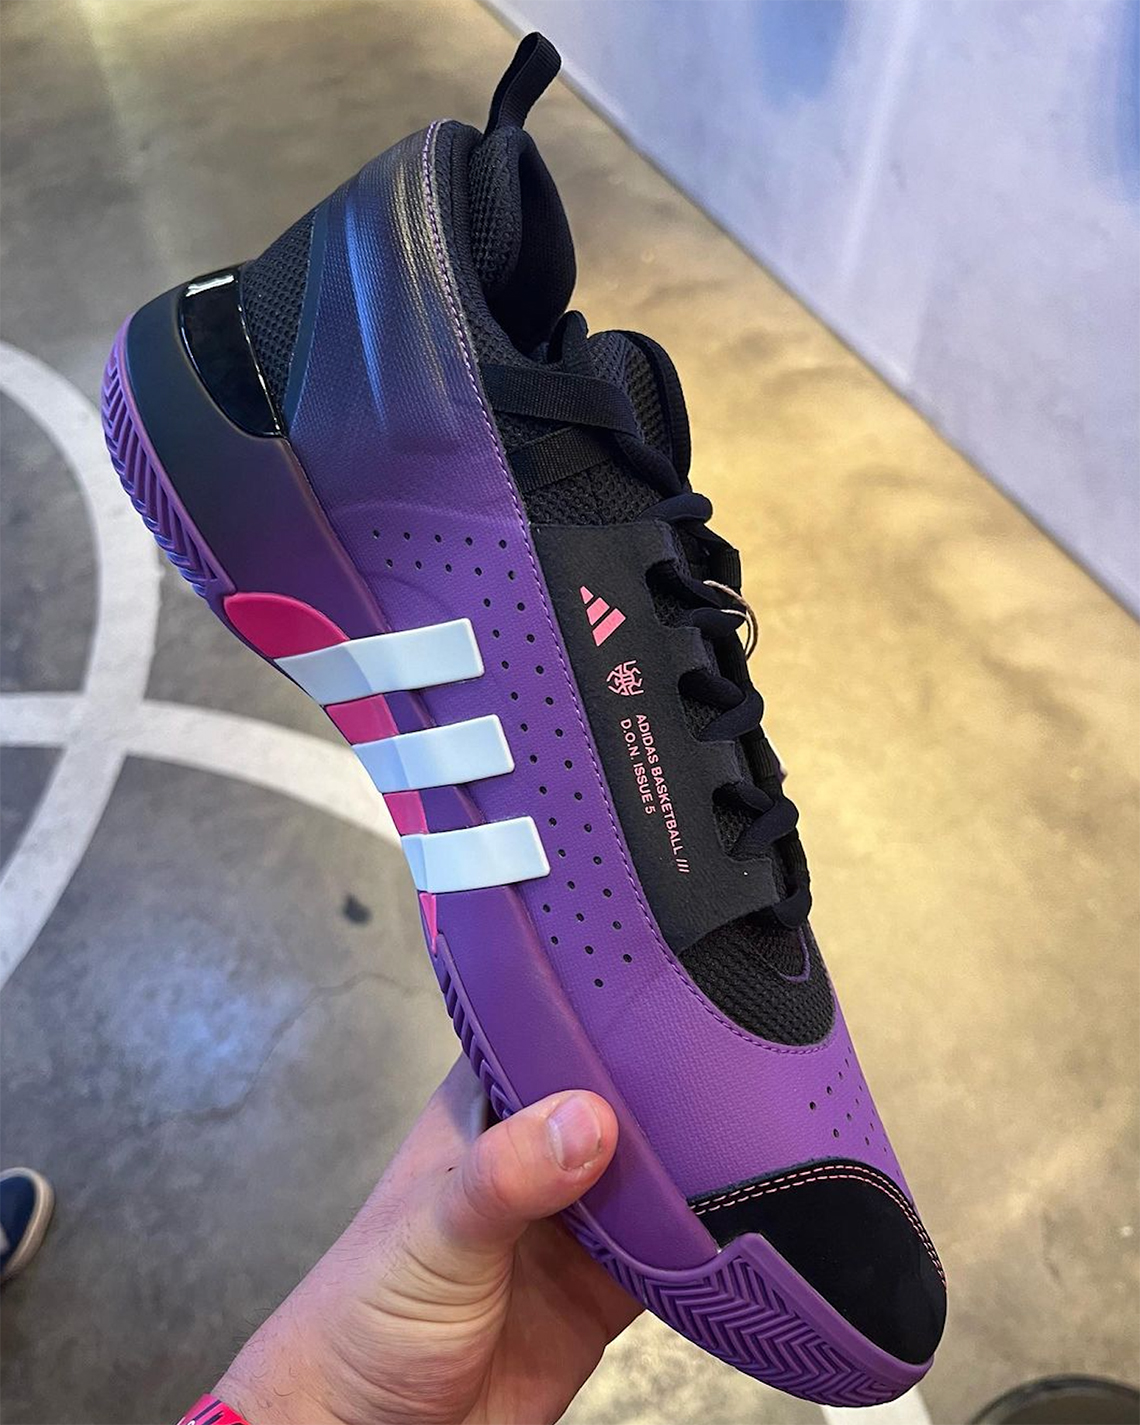 The adidas D.O.N. Issue #5 Releases in 2023 - Sneaker News